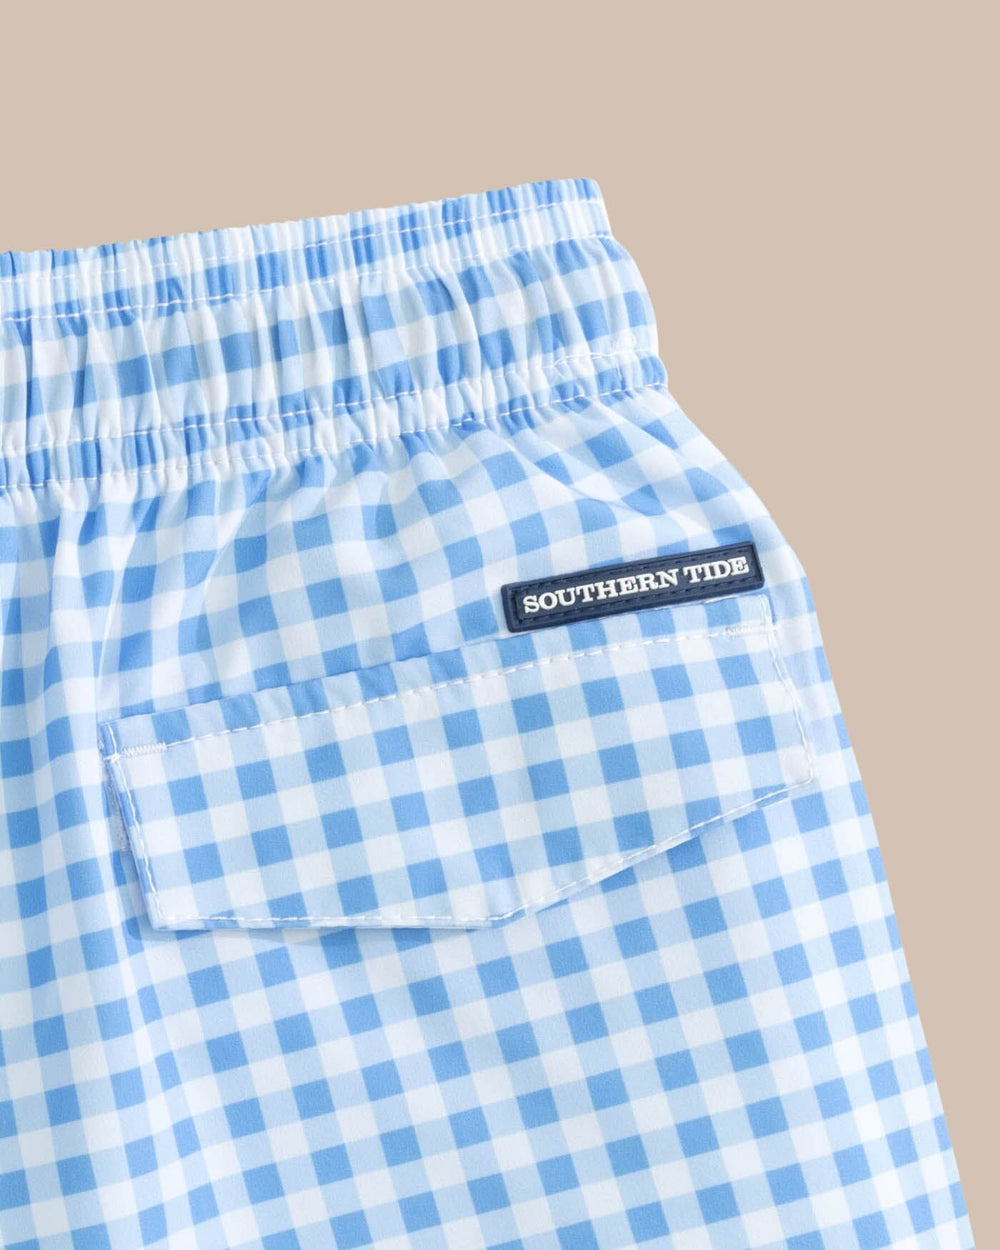 The detail view of the Southern Tide Boys Baldwin Gingham Printed Swim Trunk by Southern Tide - Ocean Channel